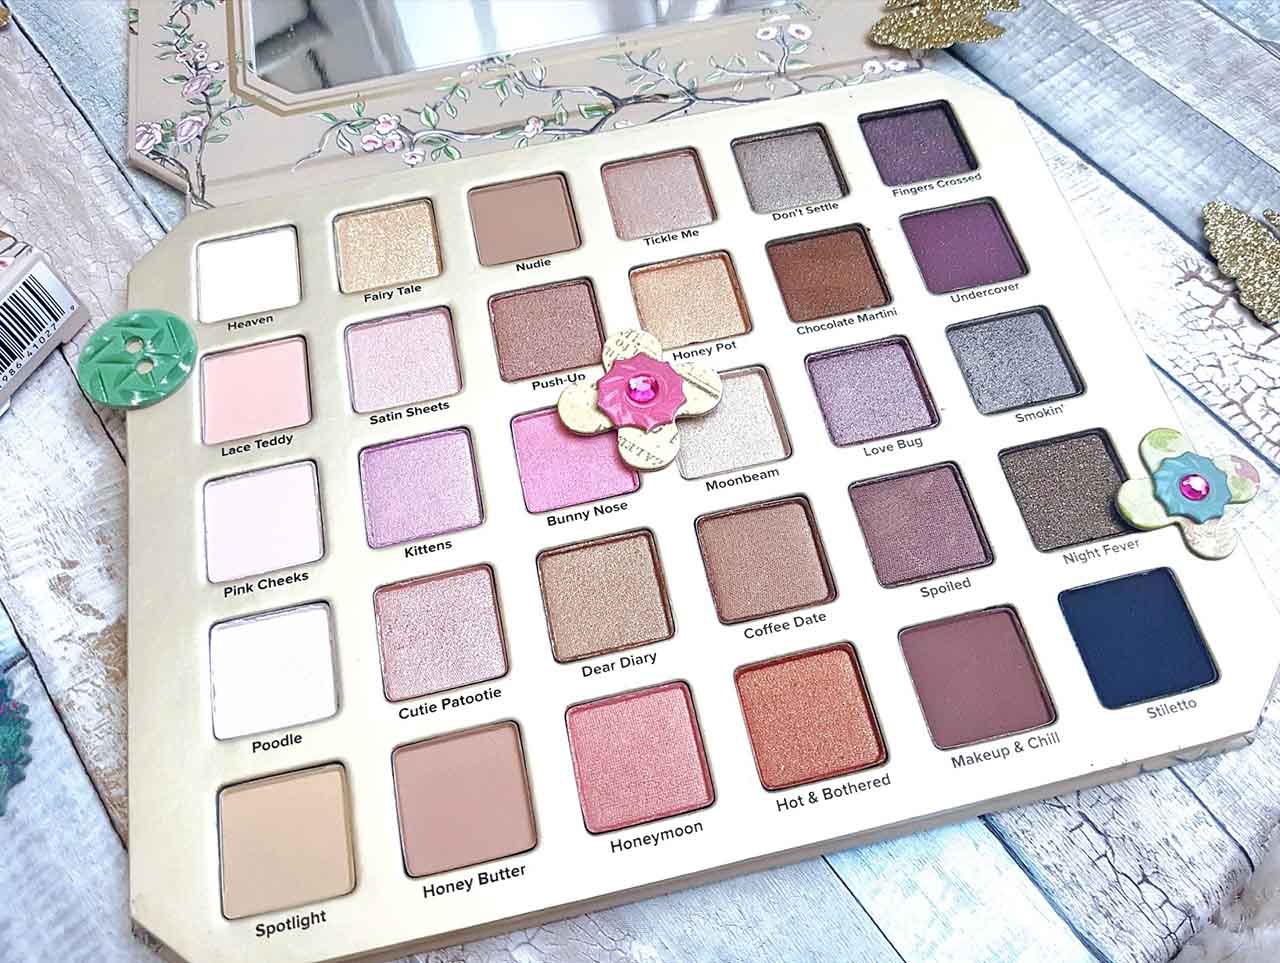 How Much Love Does The Too Faced Natural Love Palette Deserve: Whilst some of the colours may look similar to each other, they are actually all very different. There is a good mix of mattes, shimmers and metallic shadows, and all provide great pigmentation. There is some fallout from the shadows when used however it is a minor flaw in its design! Naturally when I received the palette I had to swatch all the colours to see for myself if they were as good as I had seen online.